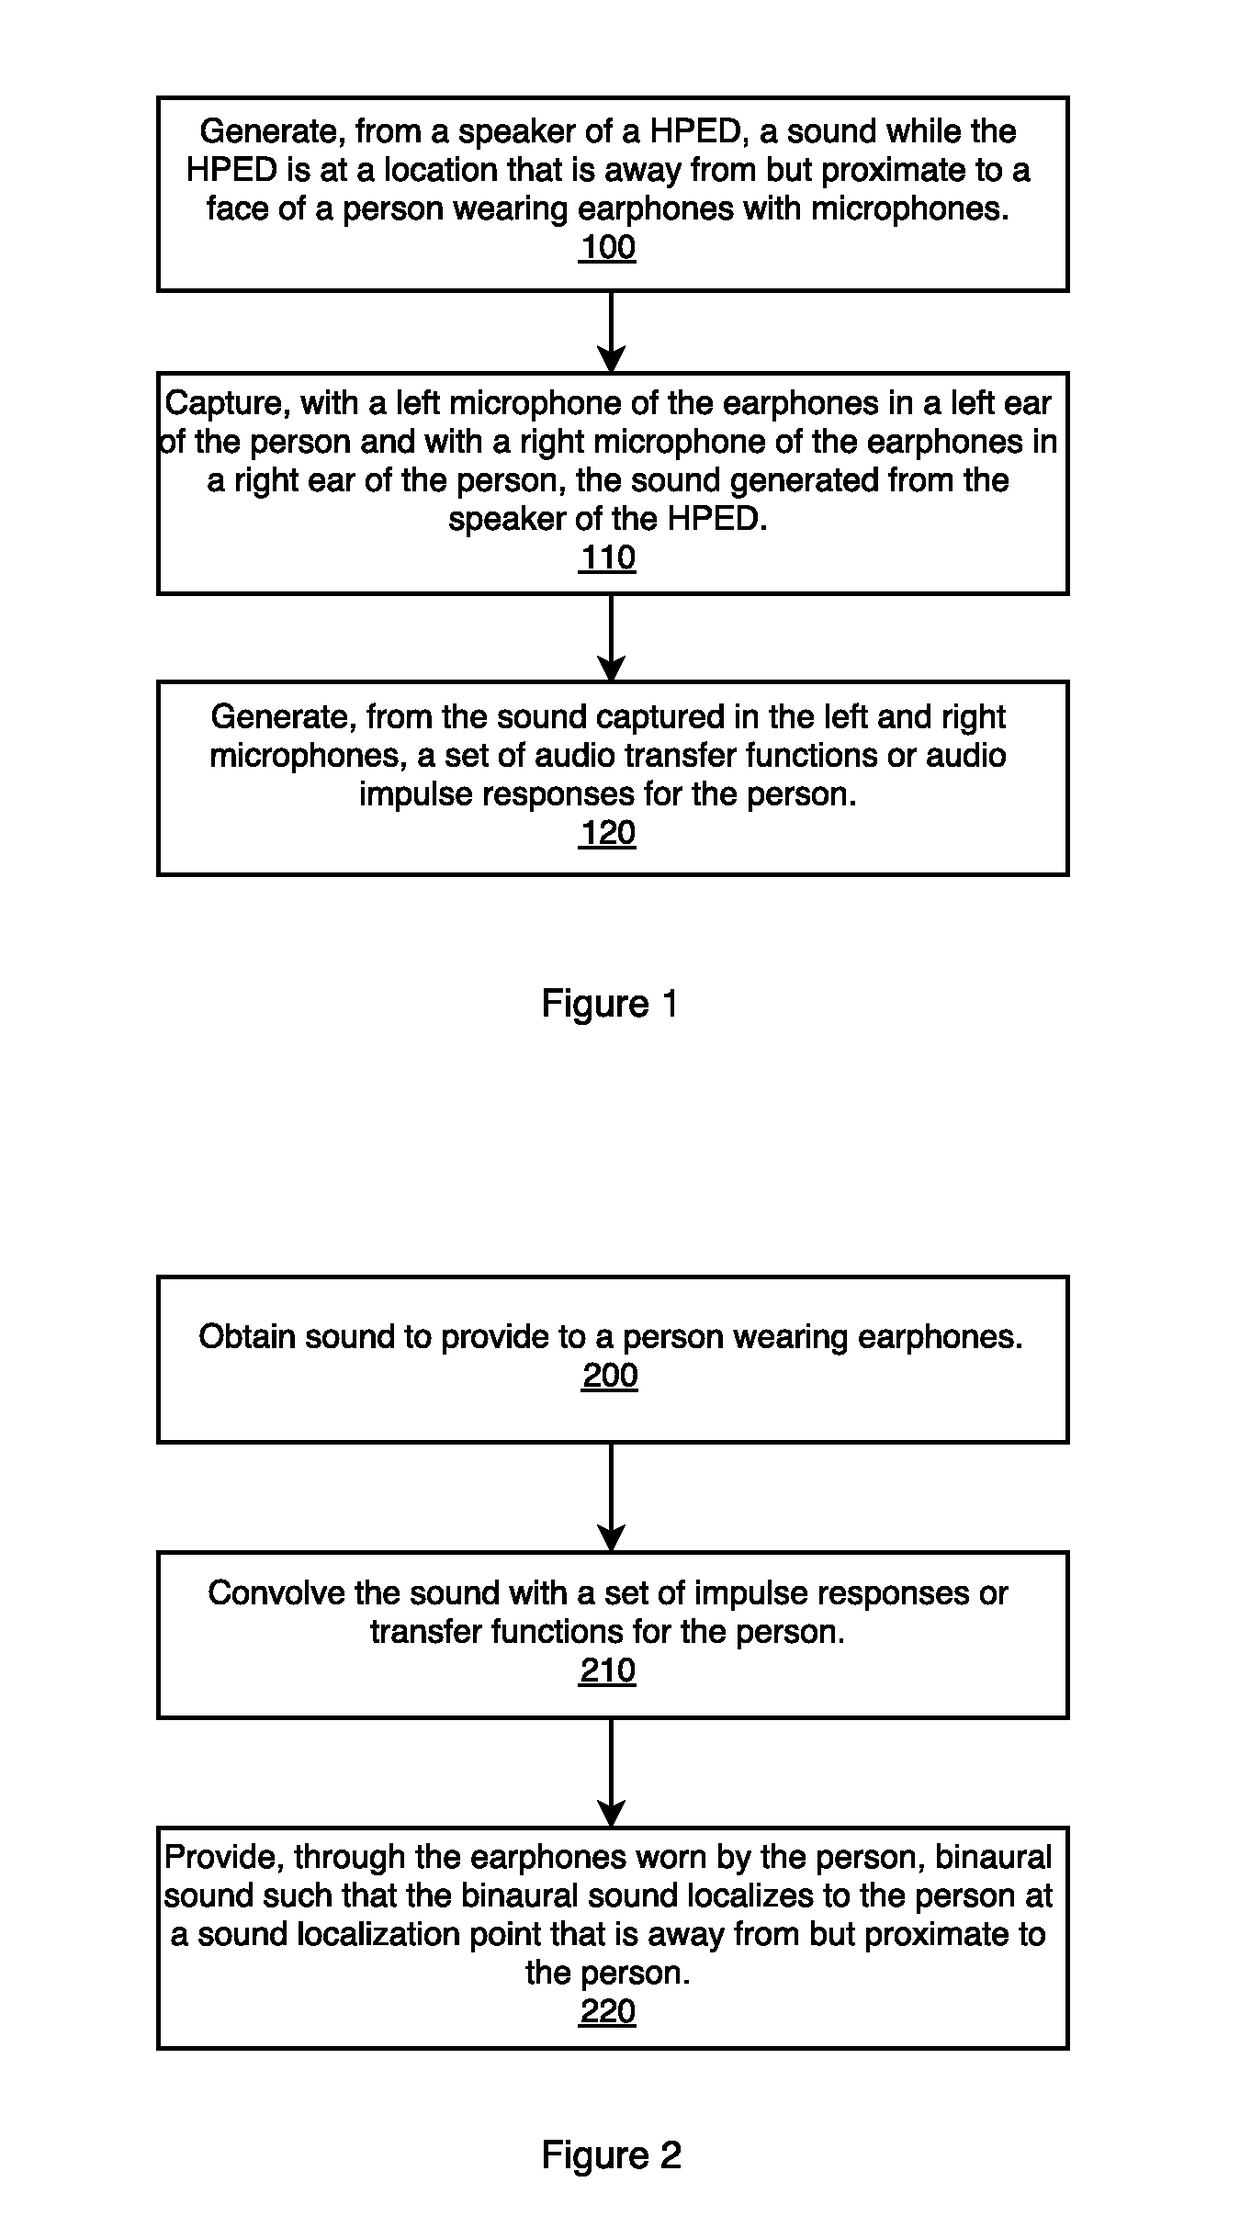 Capturing Audio Impulse Responses of a Person with a Smartphone